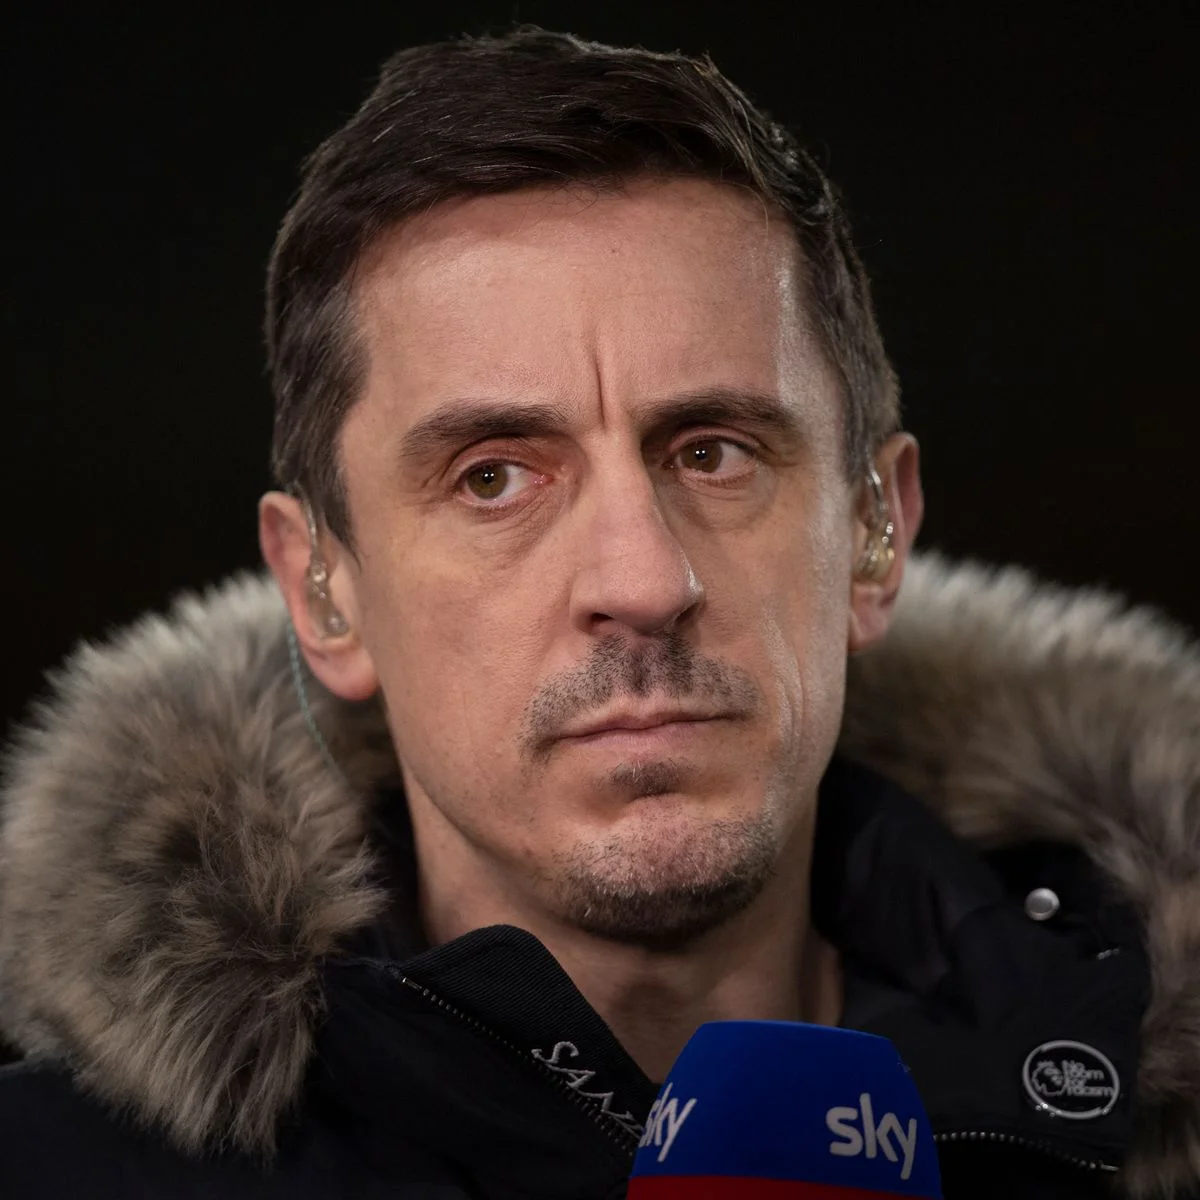 Exciting EPL Update: Championship Decider Looming, says Gary Neville